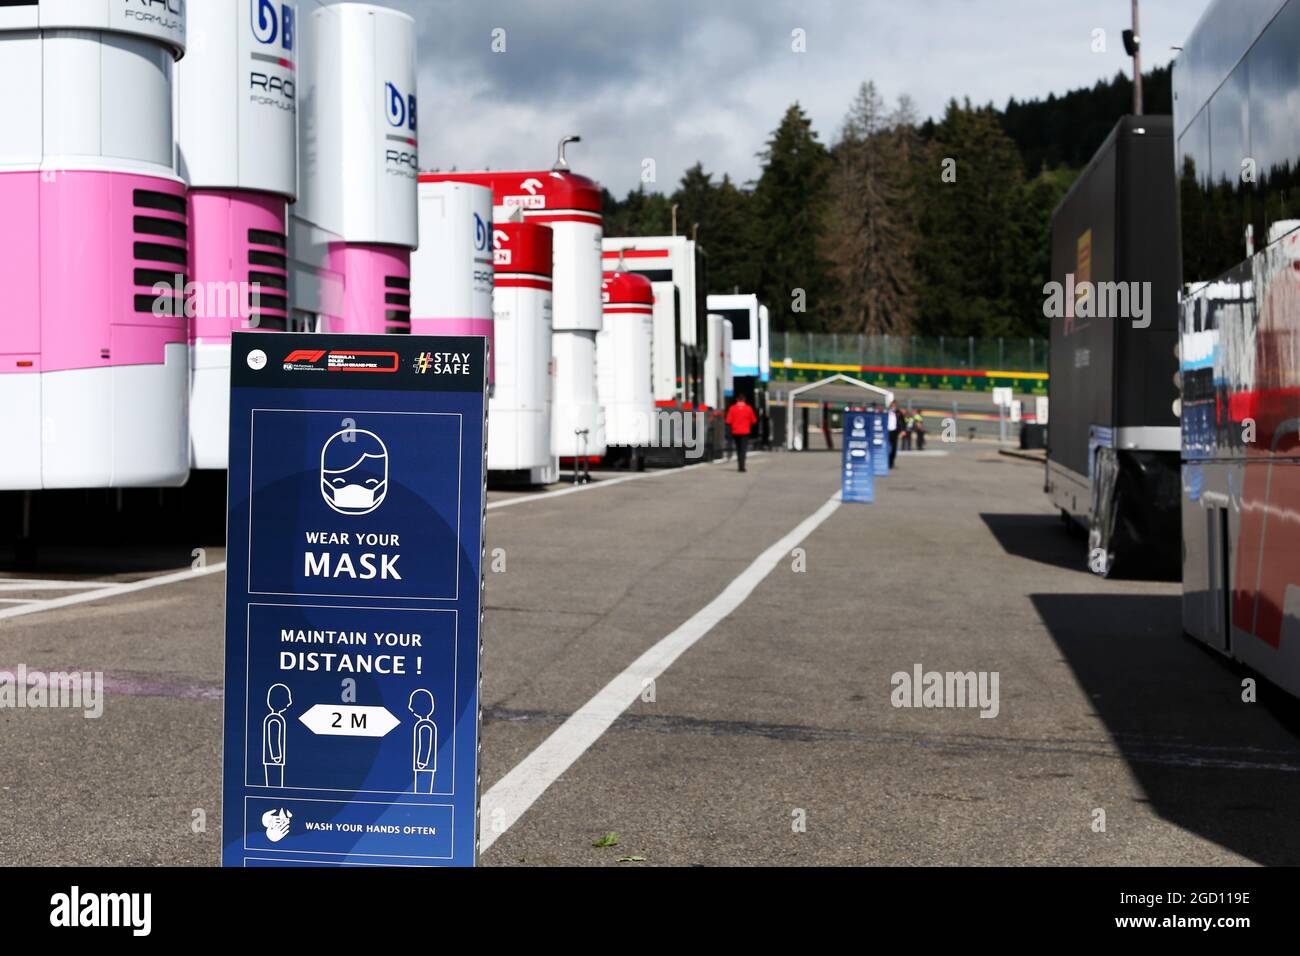 Paddock atmosphere - Coivd safety precautions sign. Belgian Grand Prix, Saturday 29th August 2020. Spa-Francorchamps, Belgium. Stock Photo